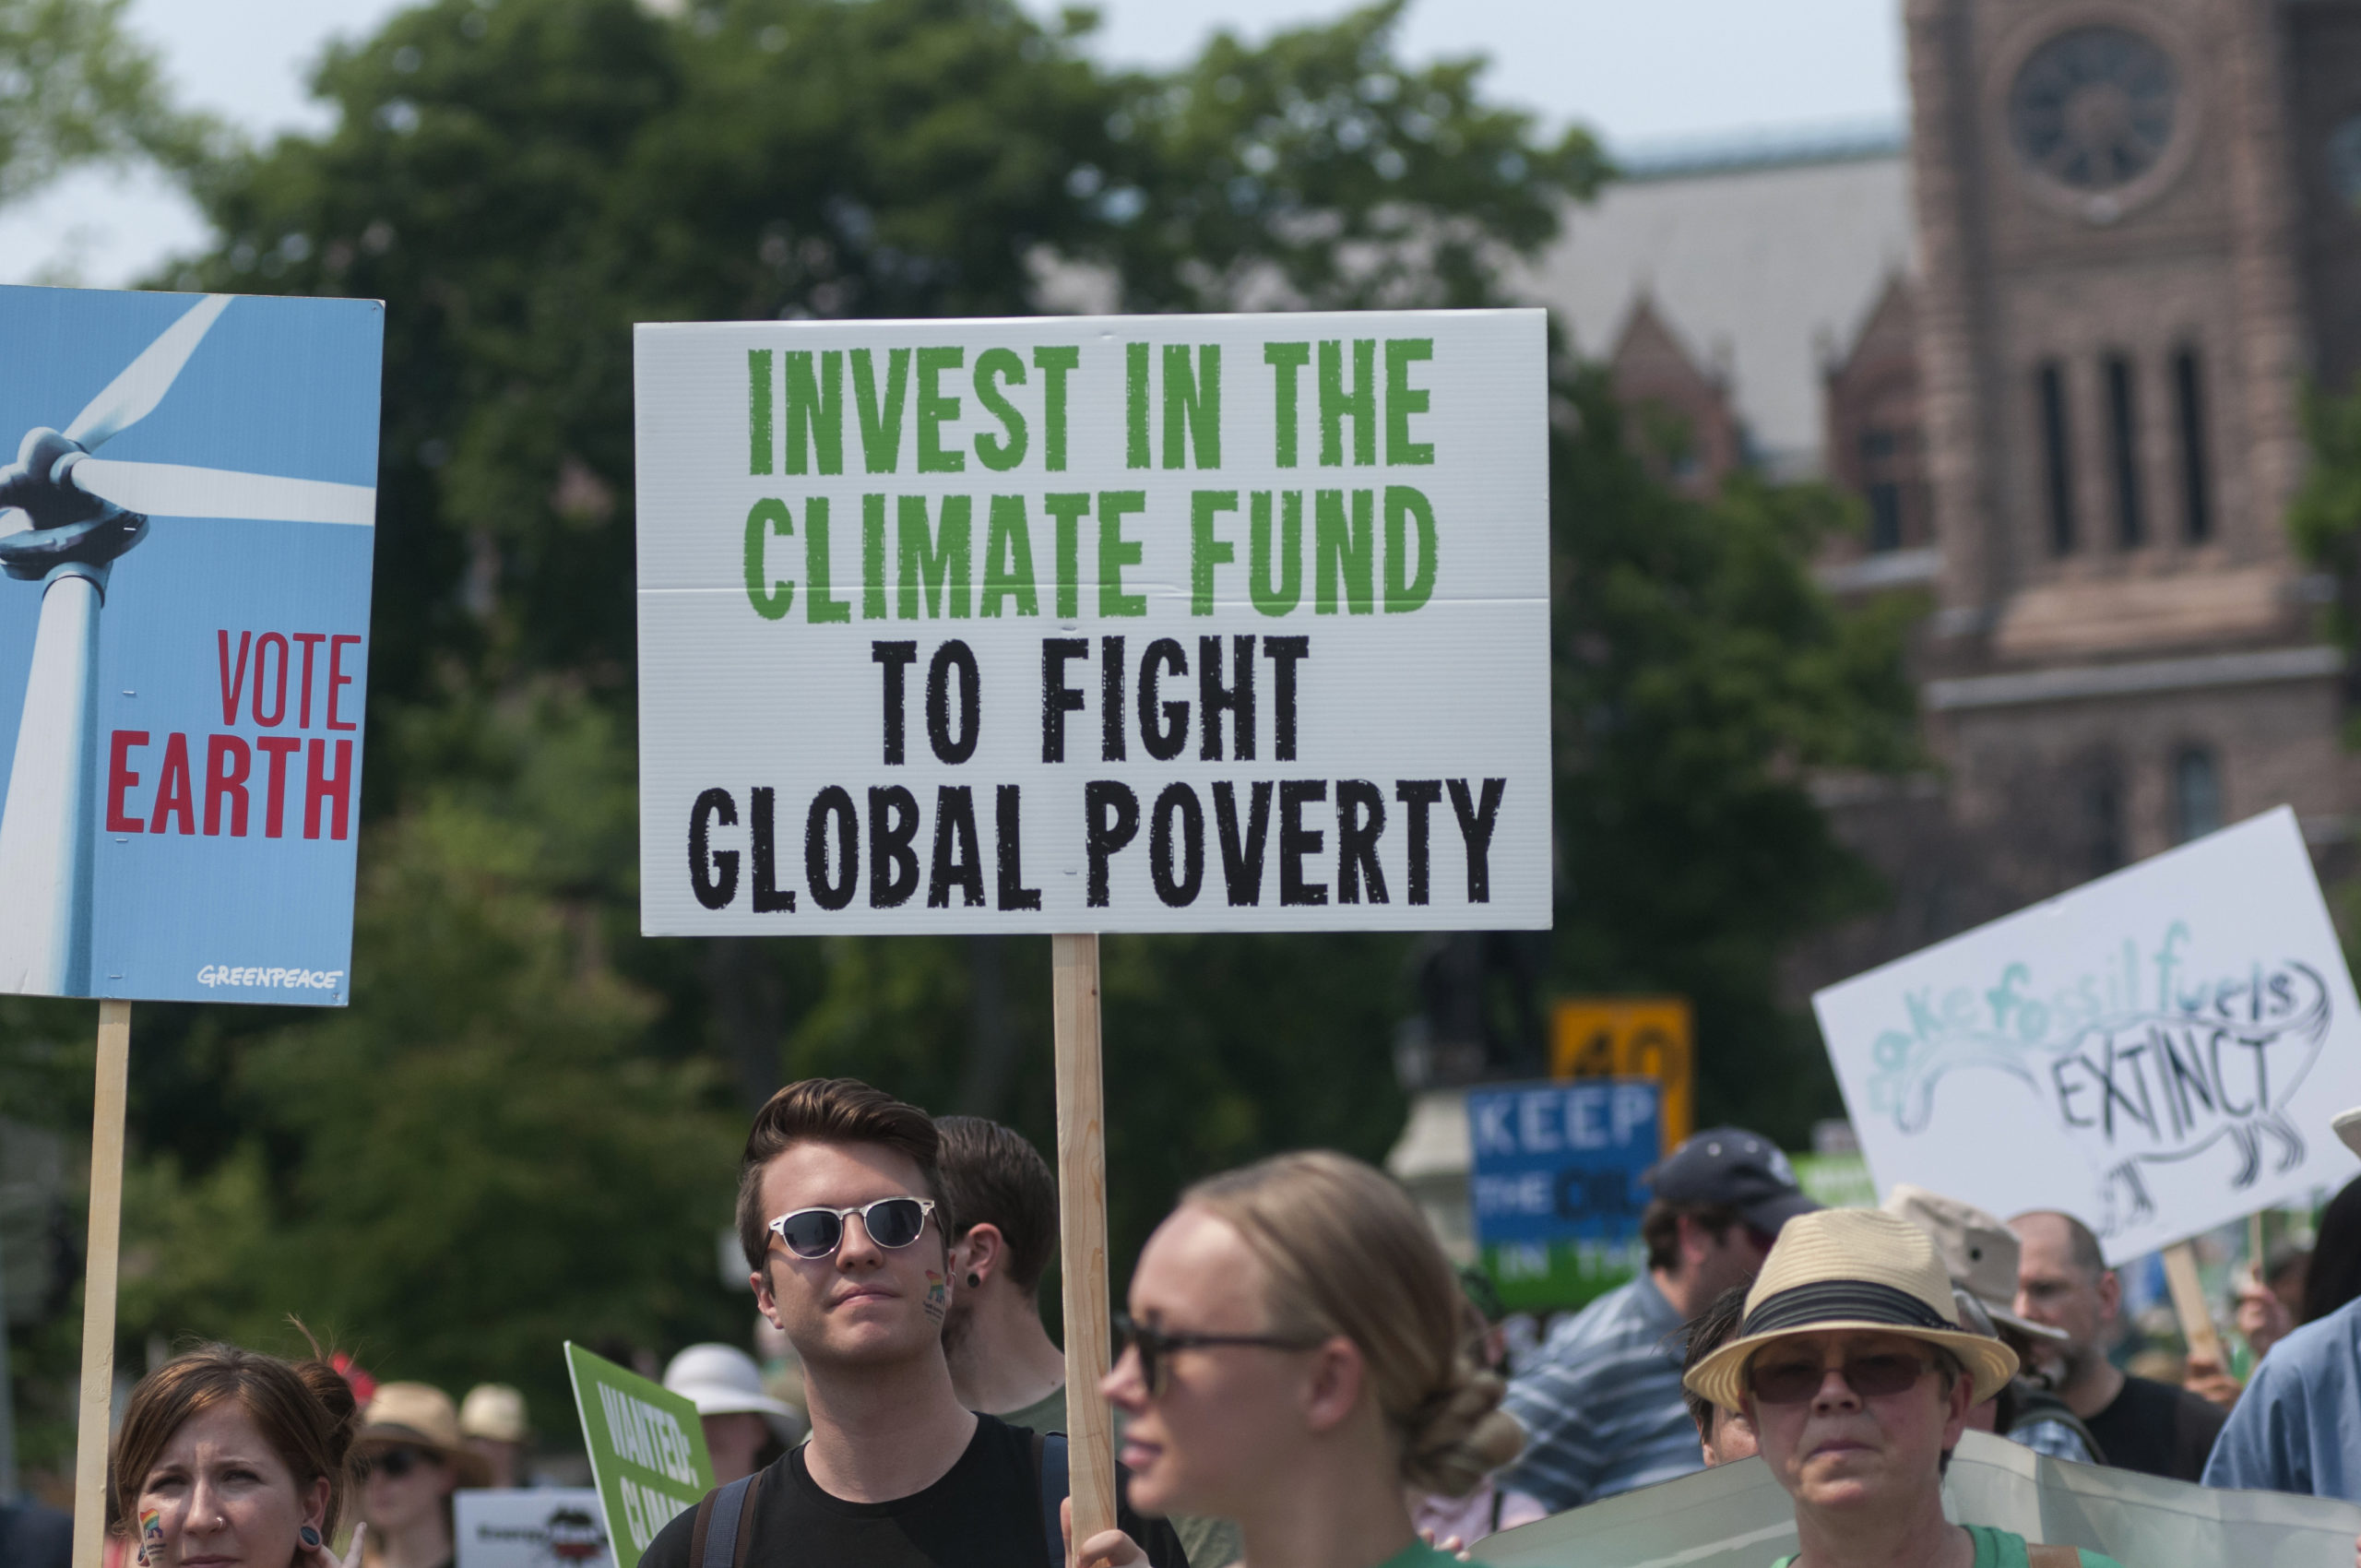 Person holds sign at a climate protest, which reads, "INVEST IN THE CLIMATE FUND TO FIGHT GLOBAL POVERTY"